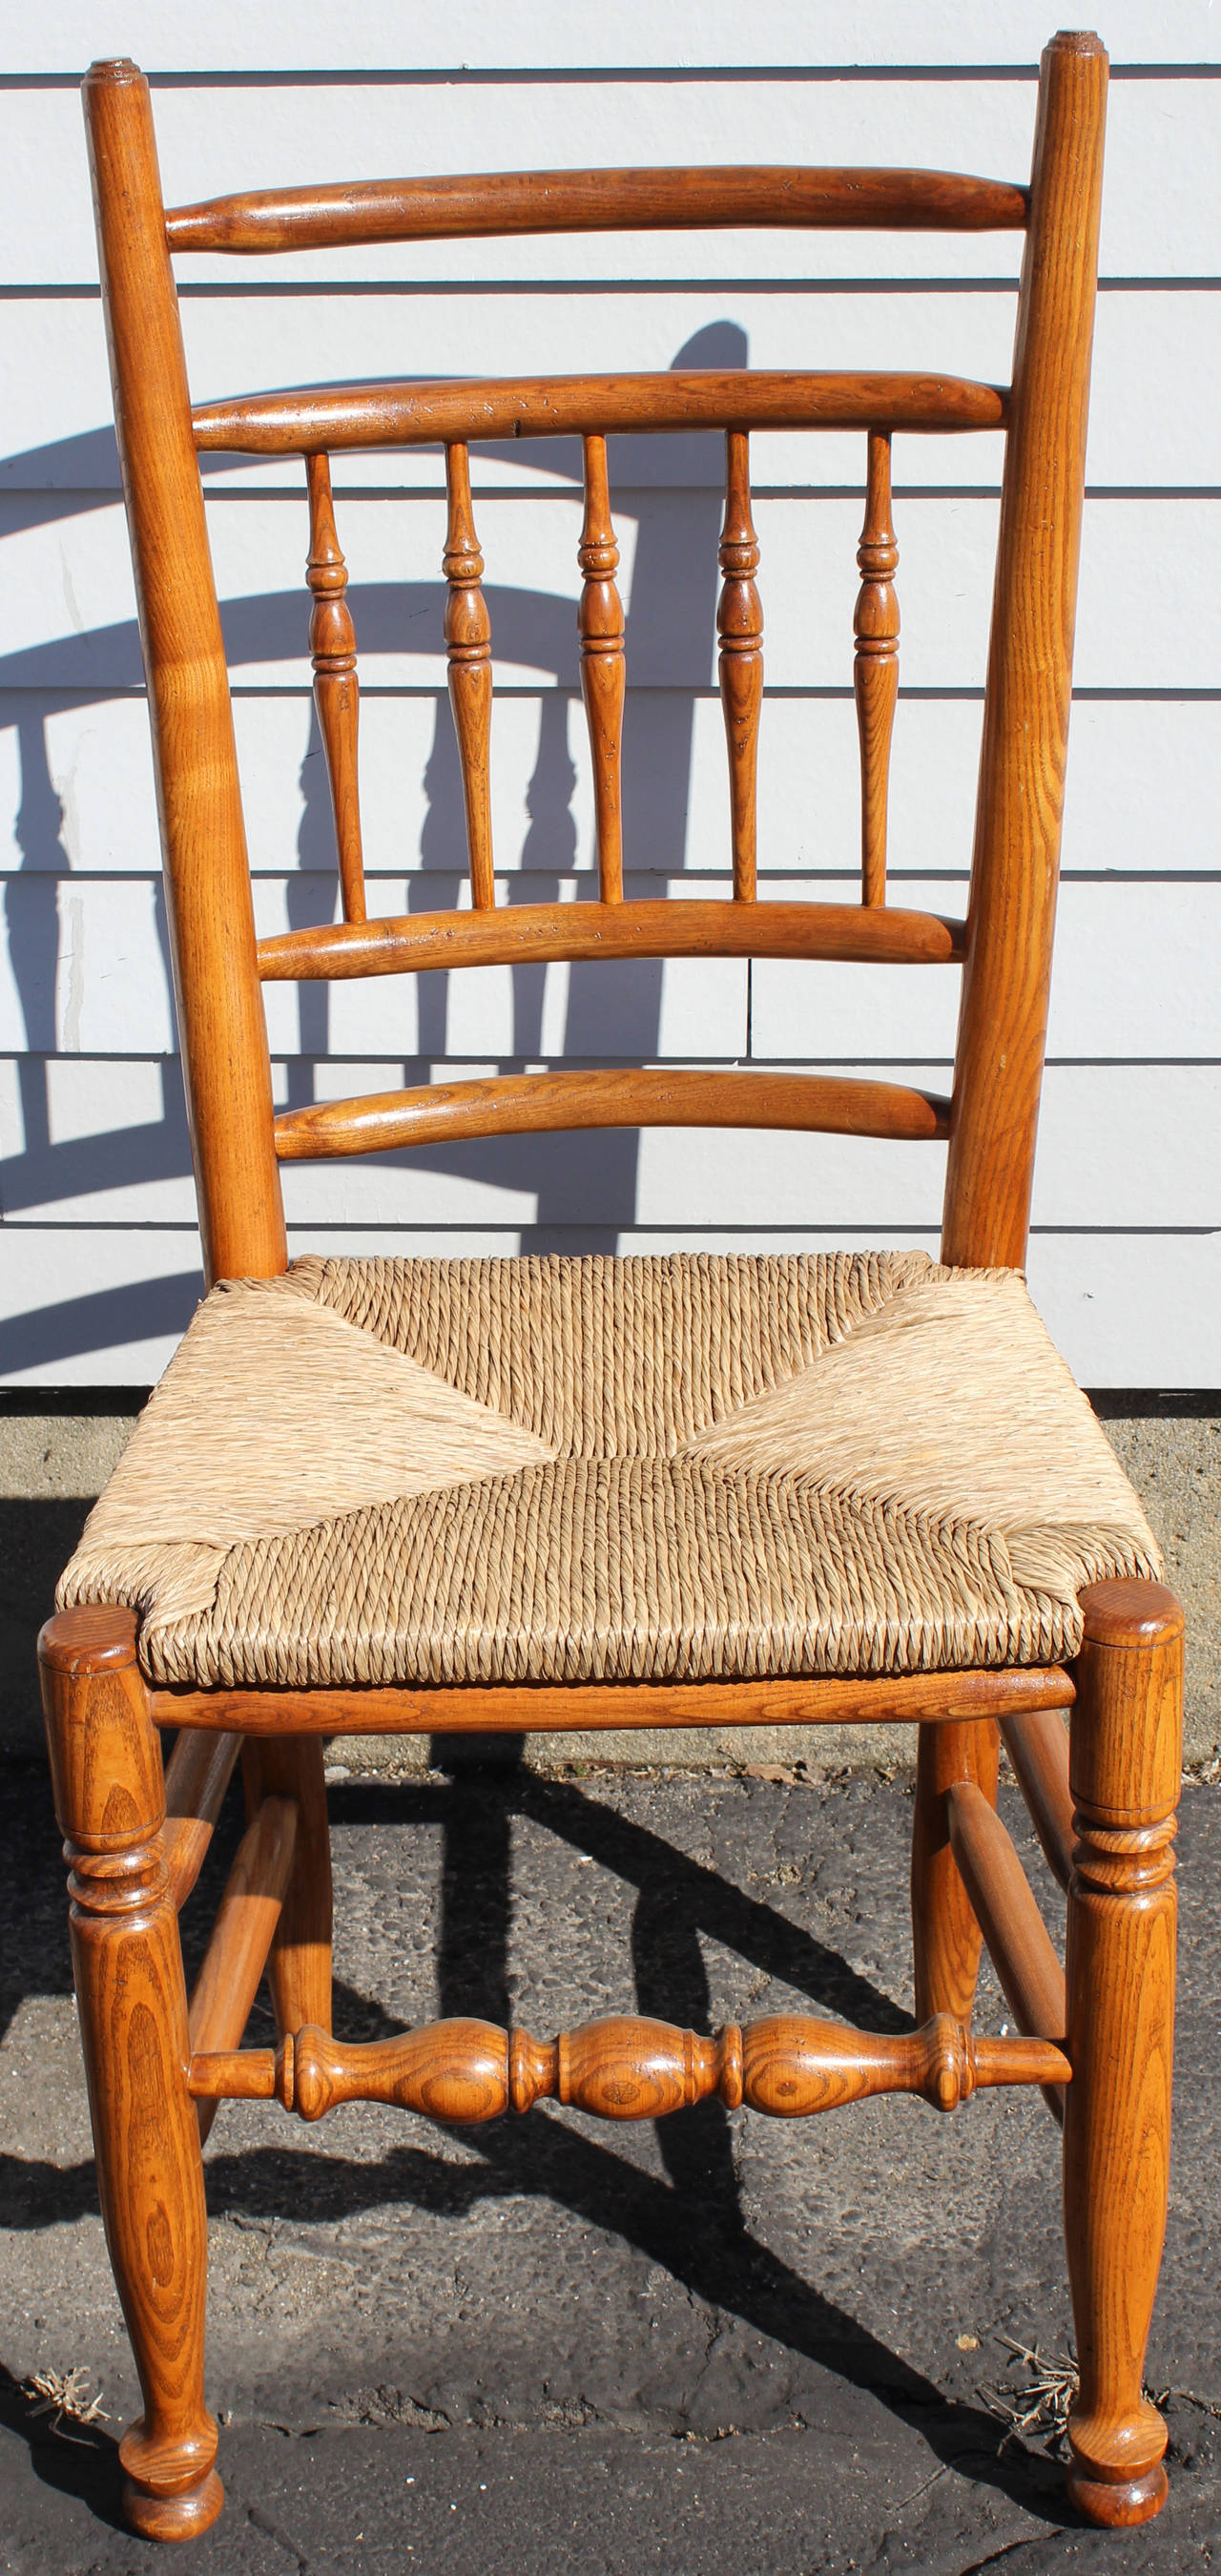 A solid set of eight bench made Irish Queen Anne style country chairs in elmwood consisting of two armchairs and six side chairs from the 20th century.